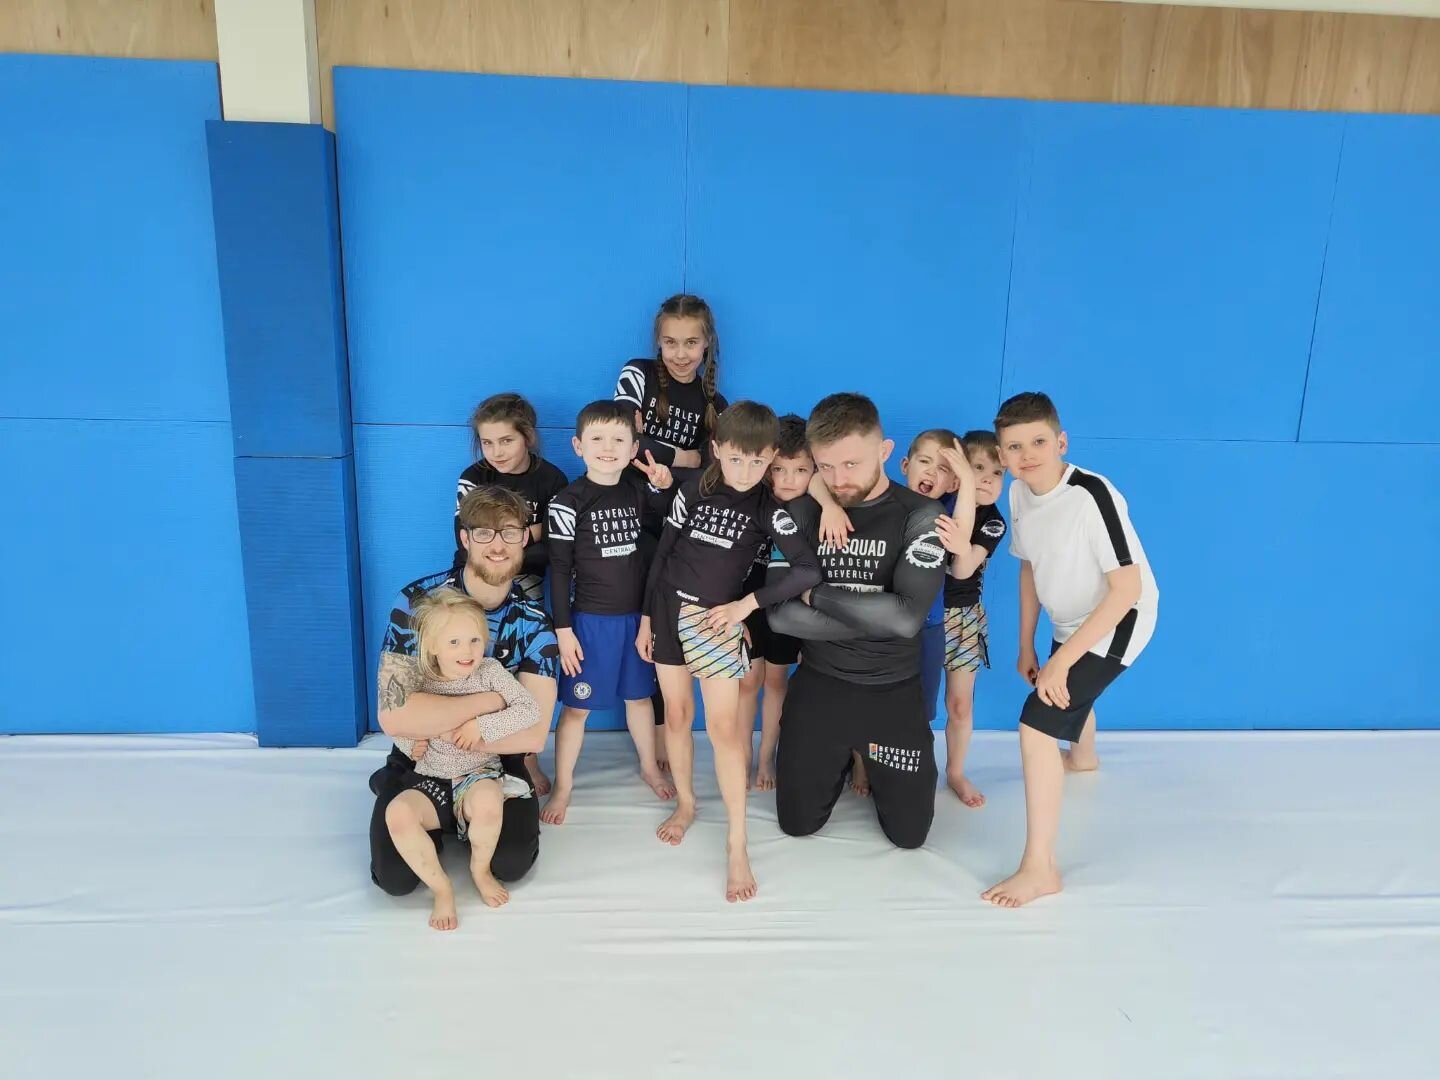 The crew

Check out our youth time table!

Monday 5.00pm
Kickboxing

Wednesday 5.00pm
Jiujitsu

Saturday 9. 00am
BJJ